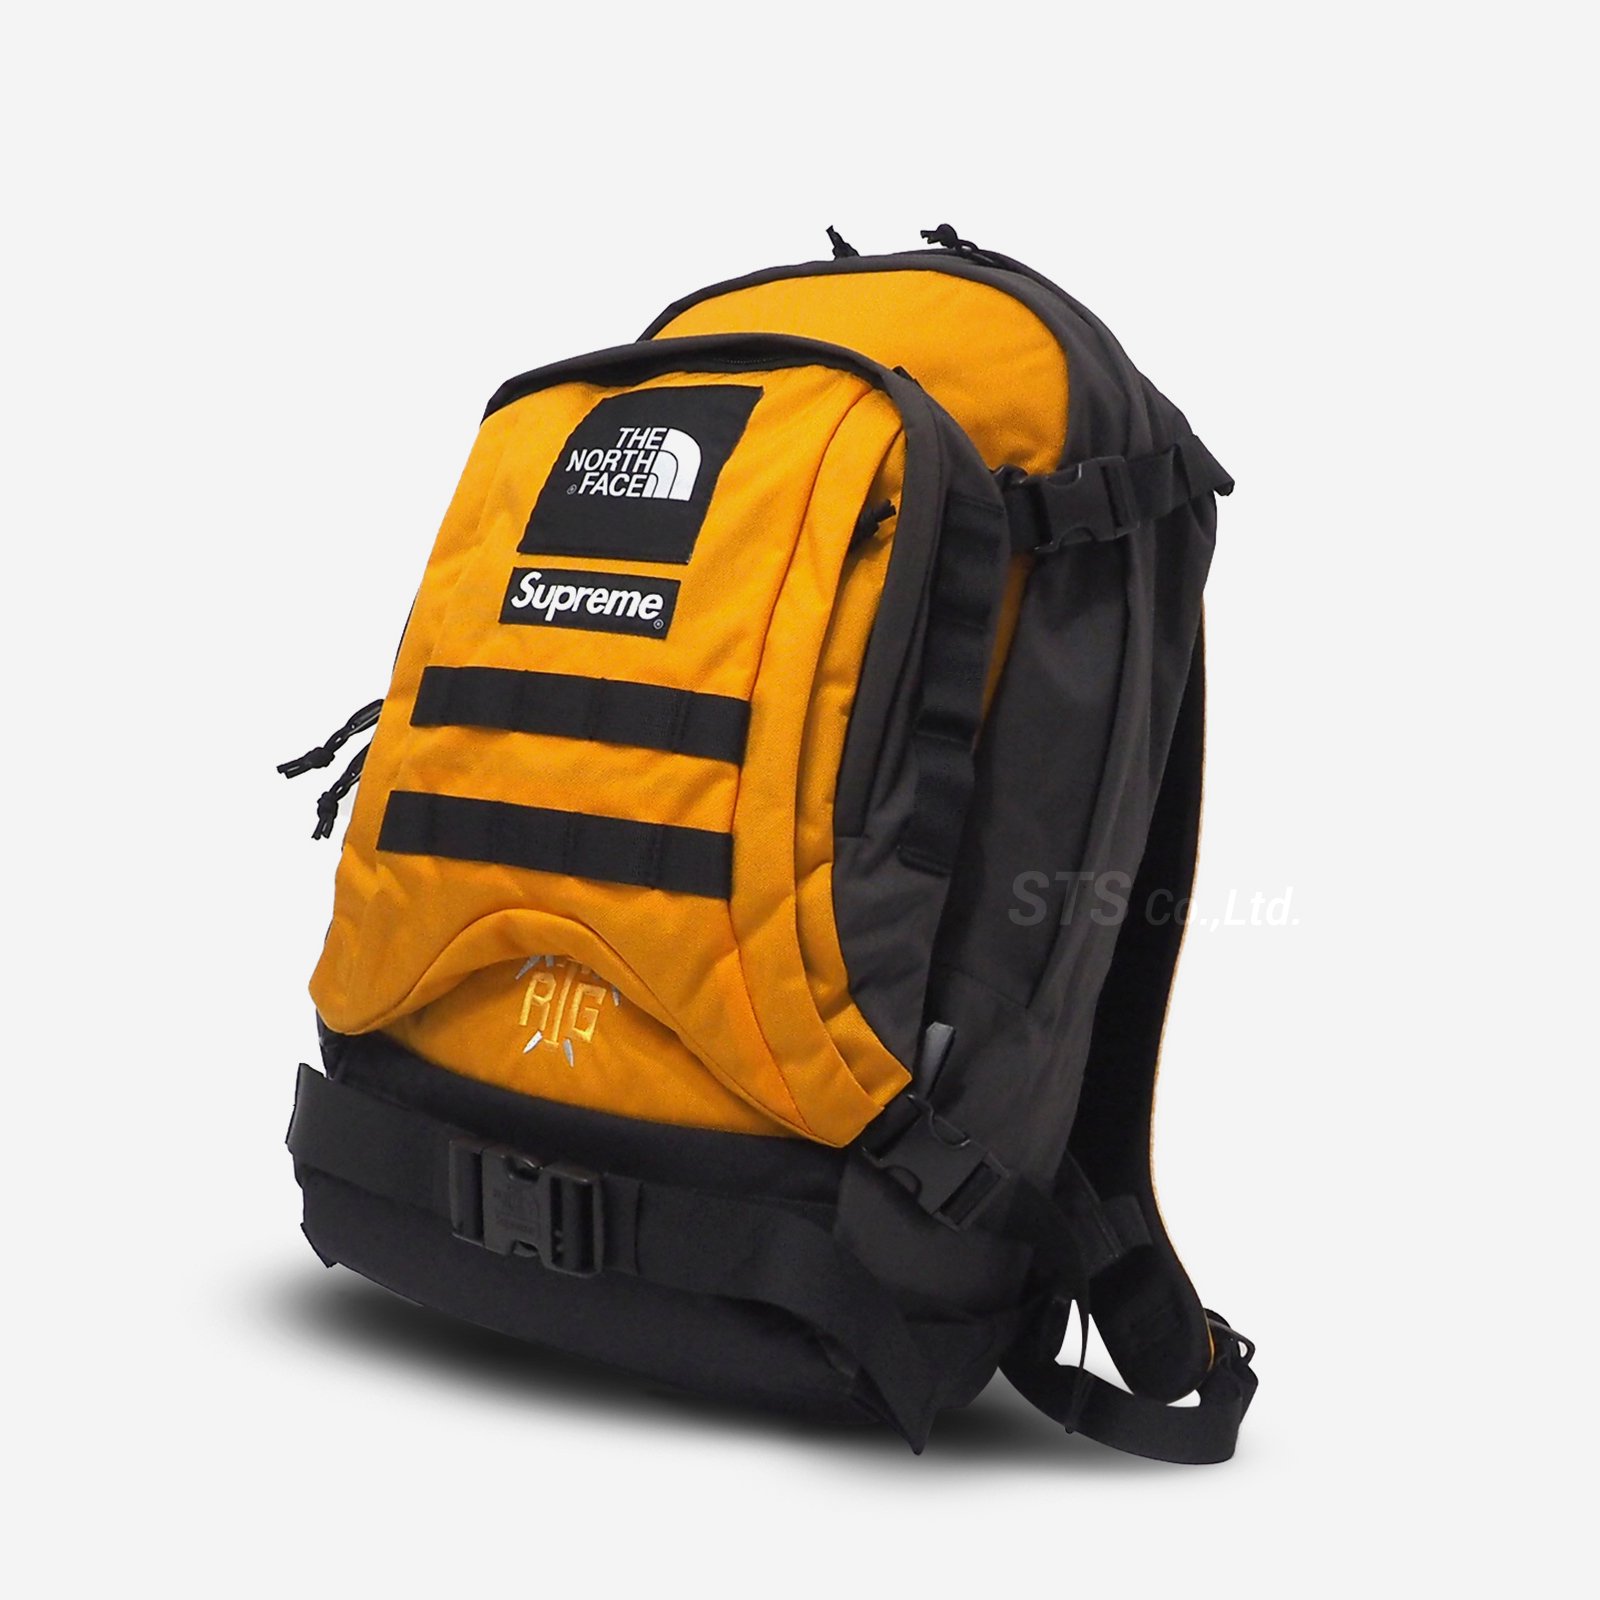 supreme/The North Face RTG Backpack